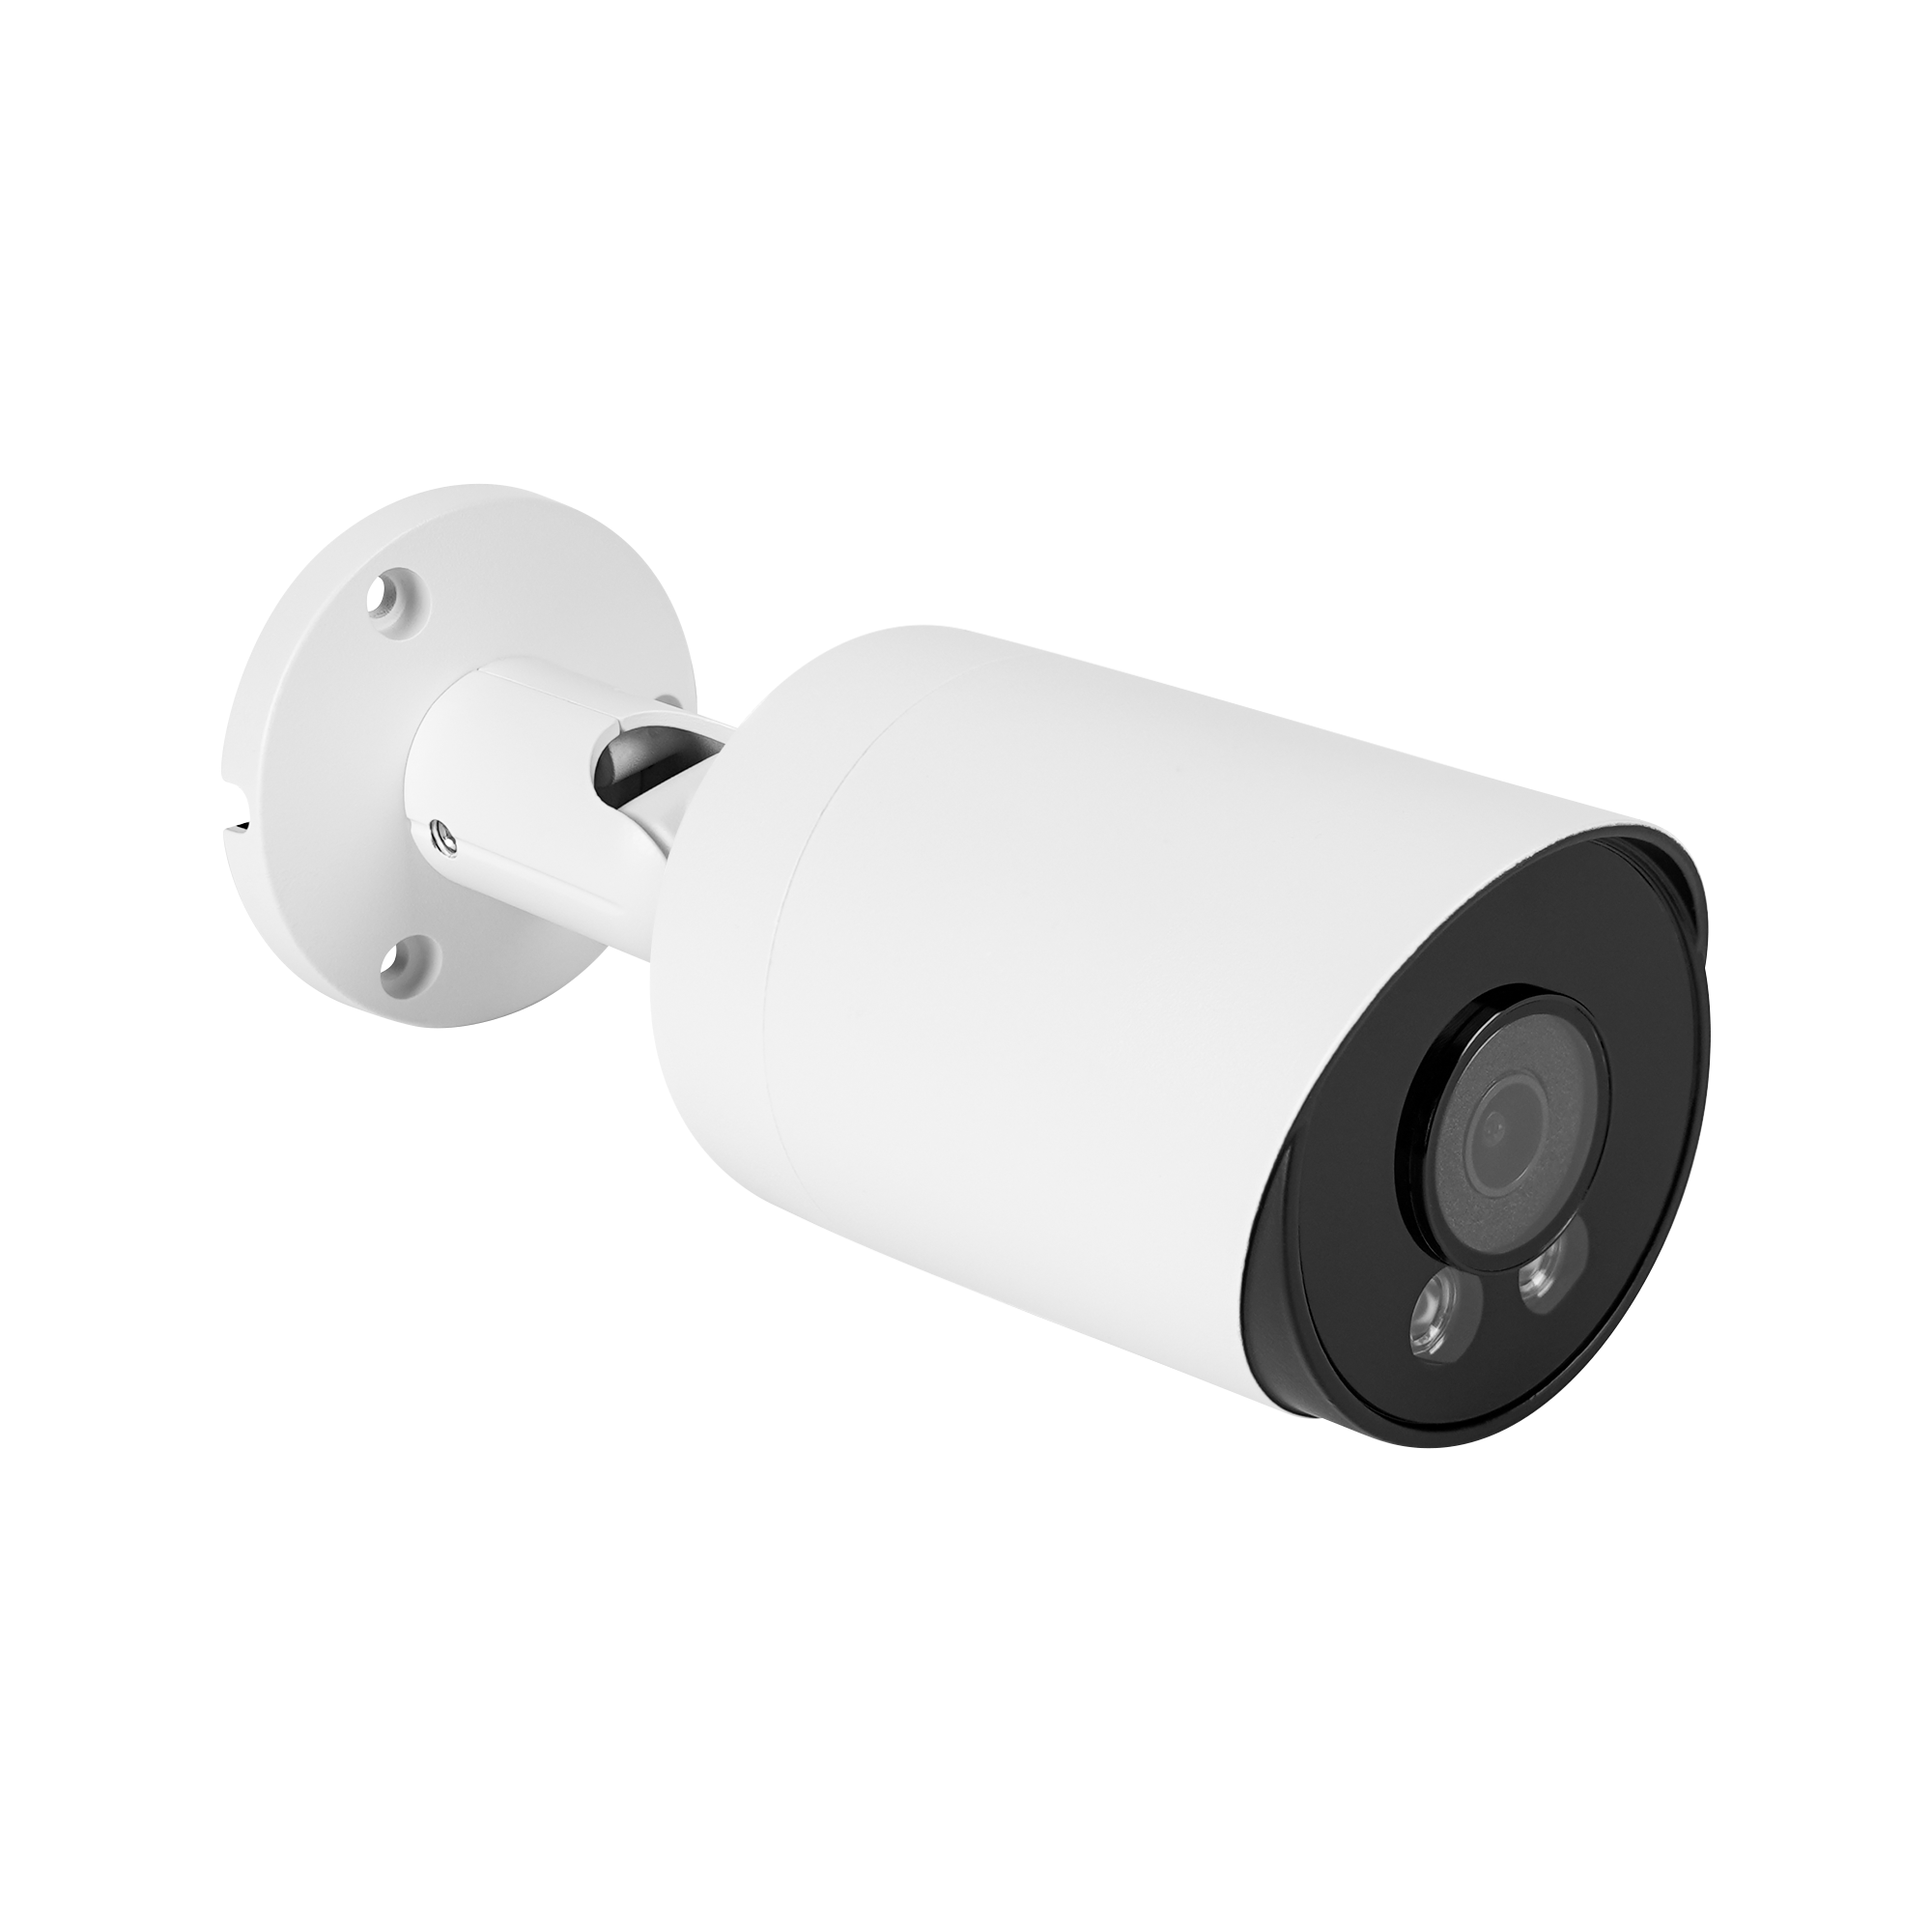 6MP Outdoor PoE IP Bullet Camera with Built-in Microphone